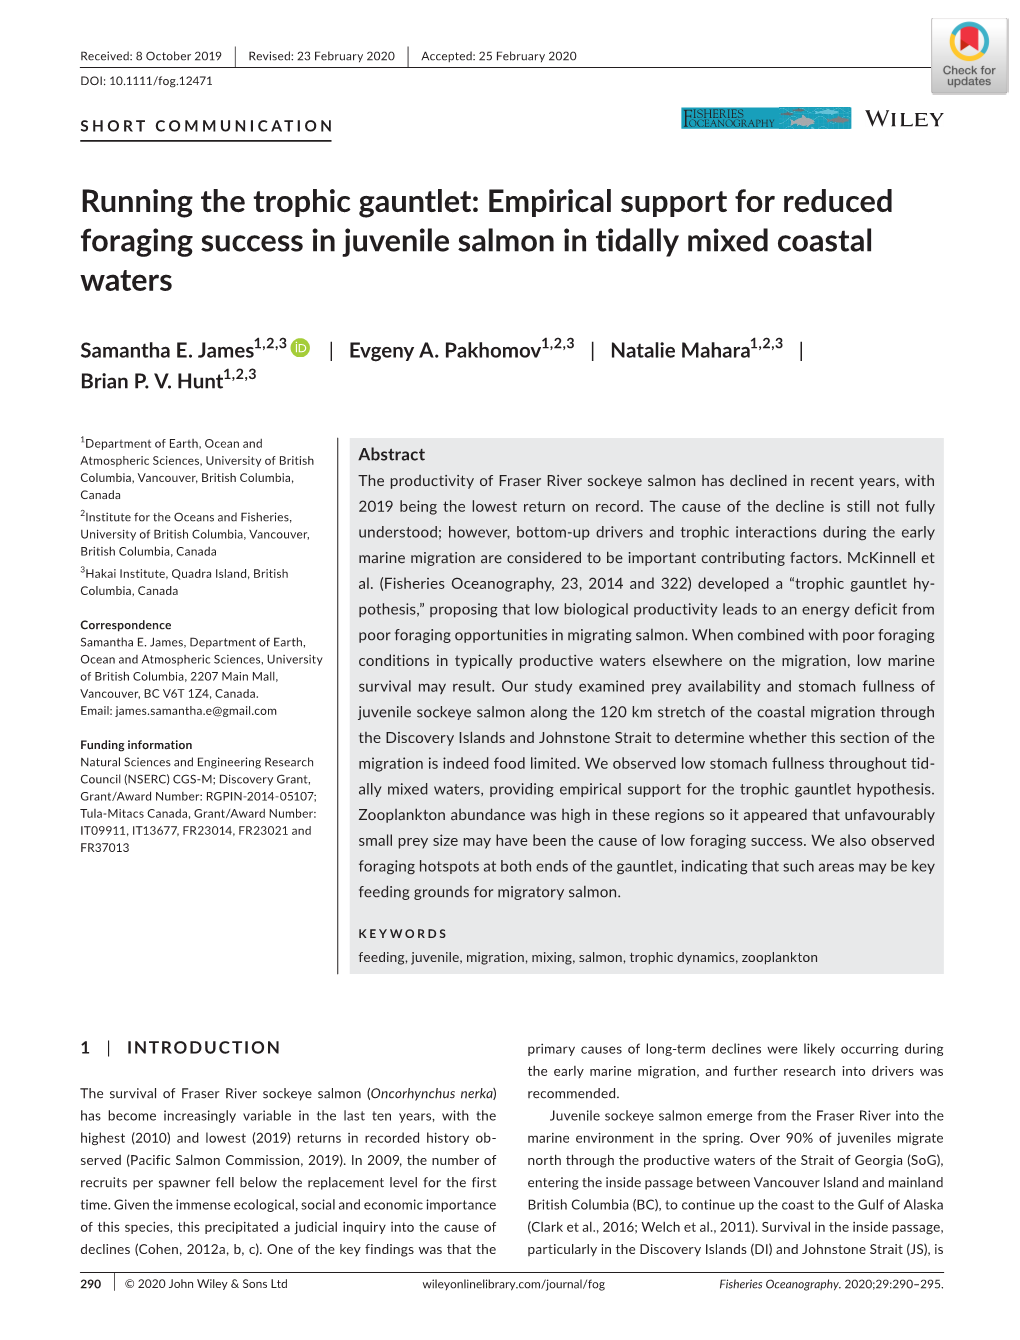 Running the Trophic Gauntlet: Empirical Support for Reduced Foraging Success in Juvenile Salmon in Tidally Mixed Coastal Waters